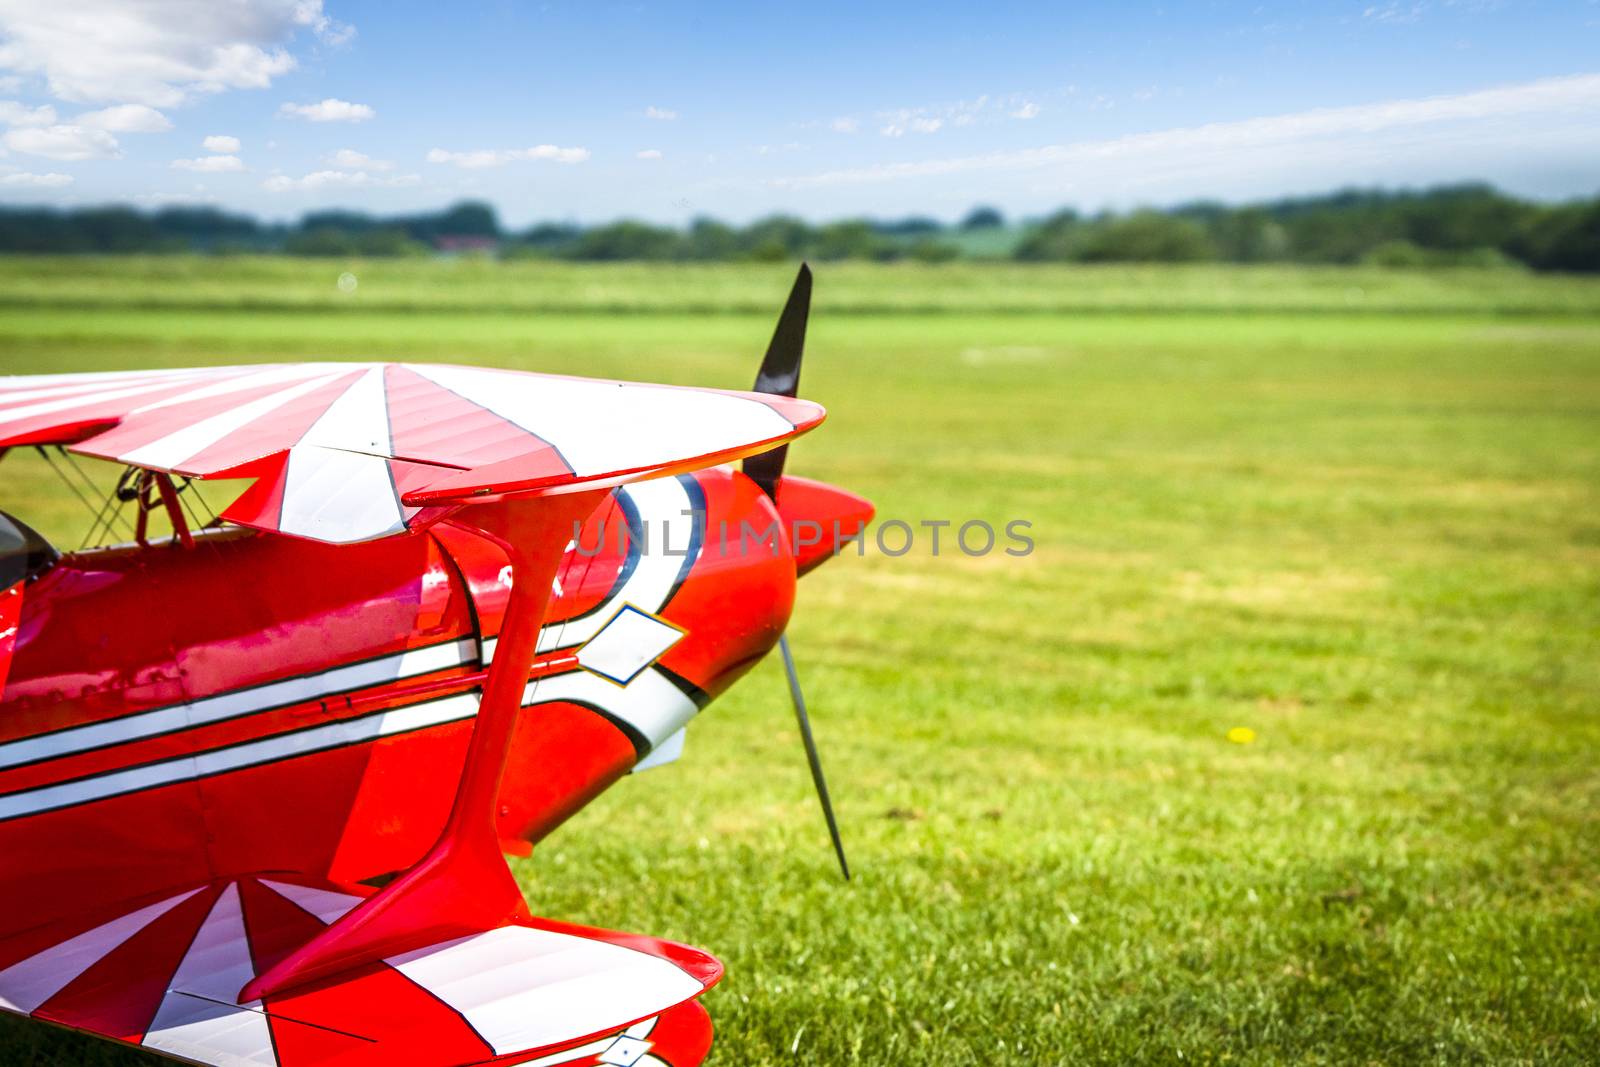 Retro airplane ready to take of on a green field in the summer